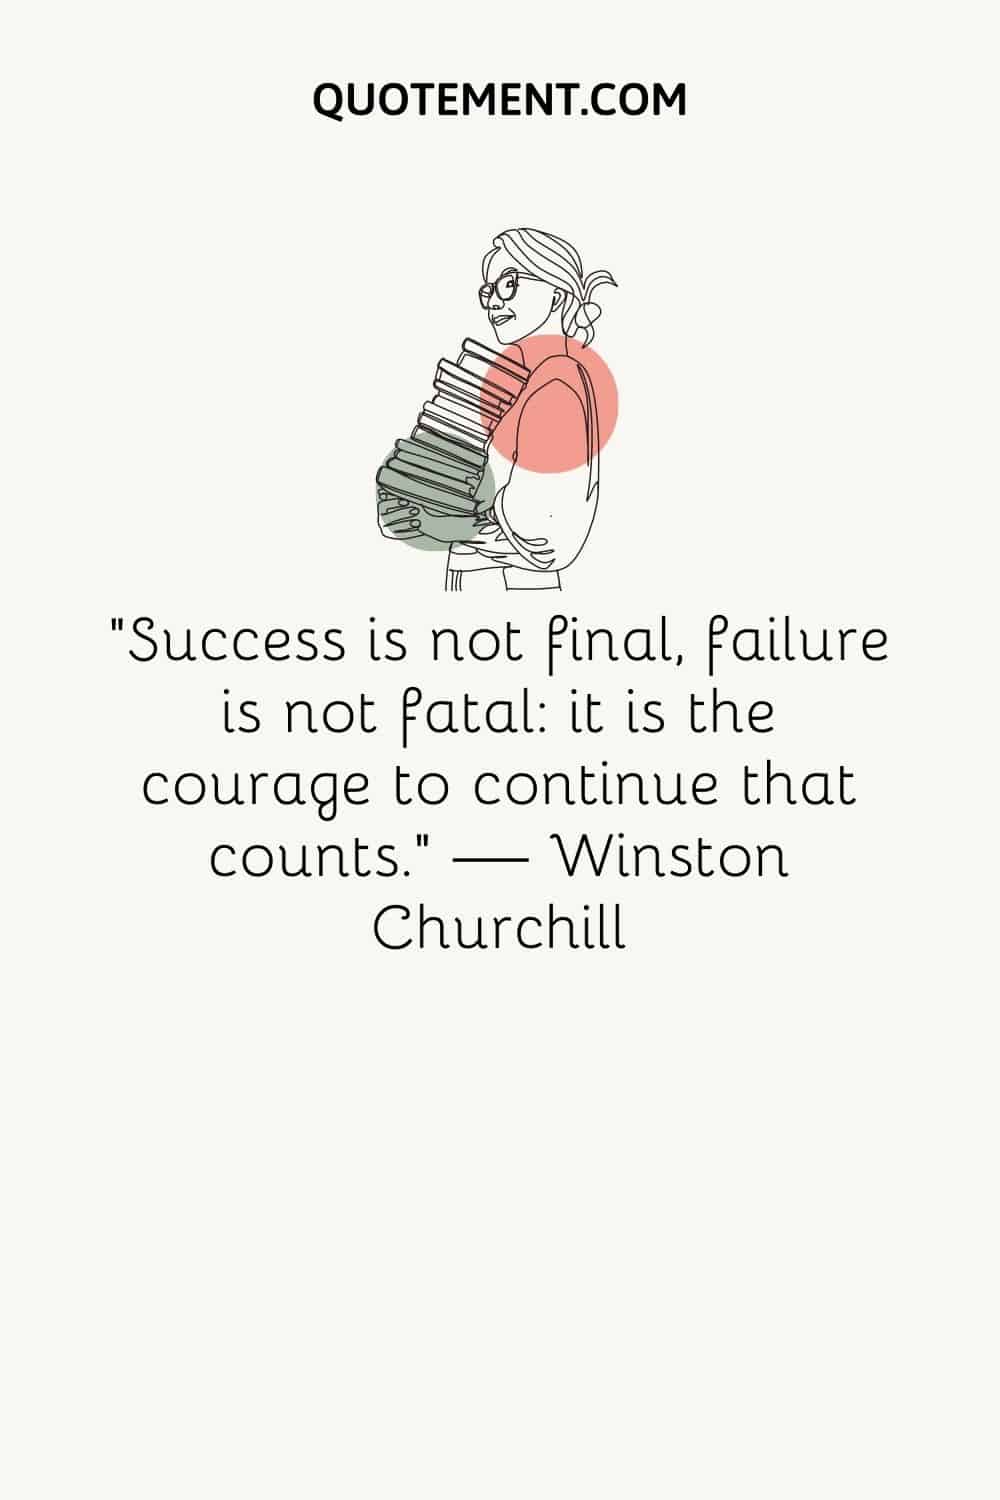 “Success is not final, failure is not fatal it is the courage to continue that counts.” ― Winston Churchill